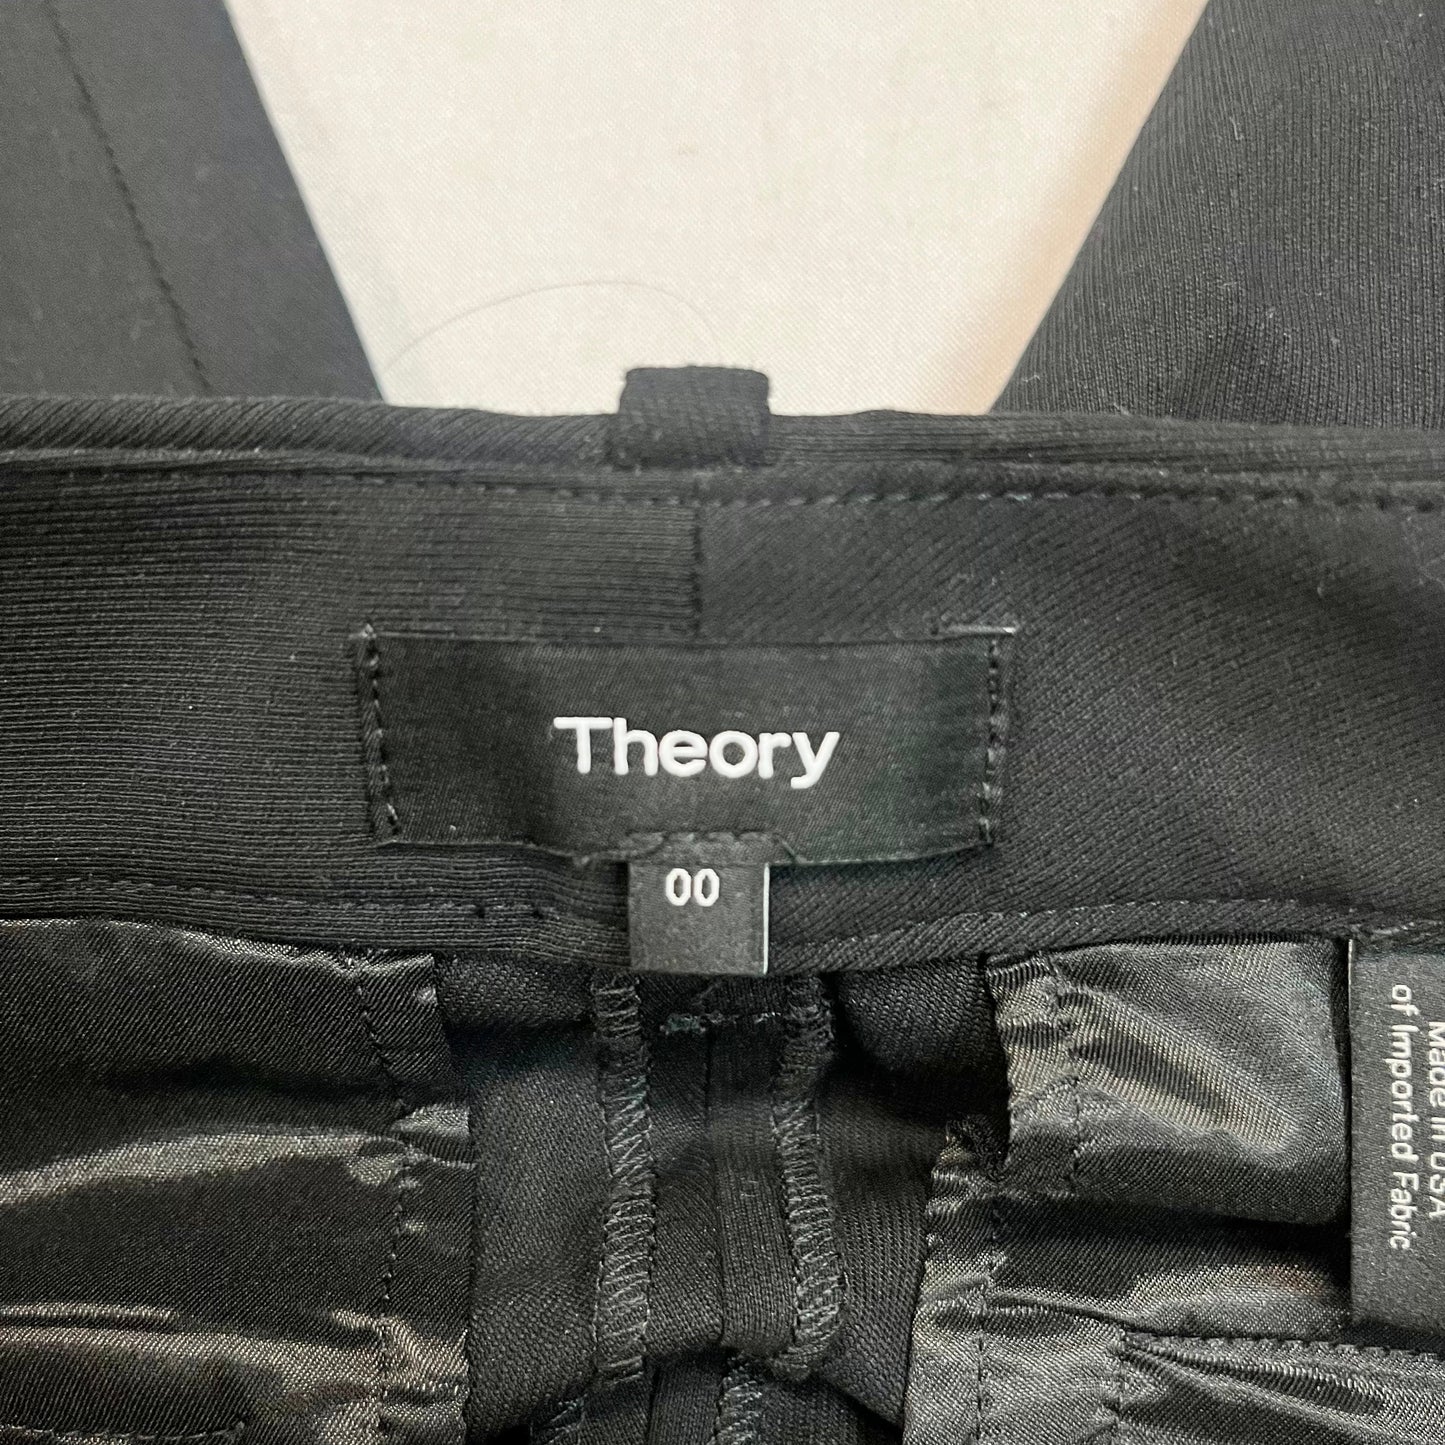 Shorts By Theory Size: 00